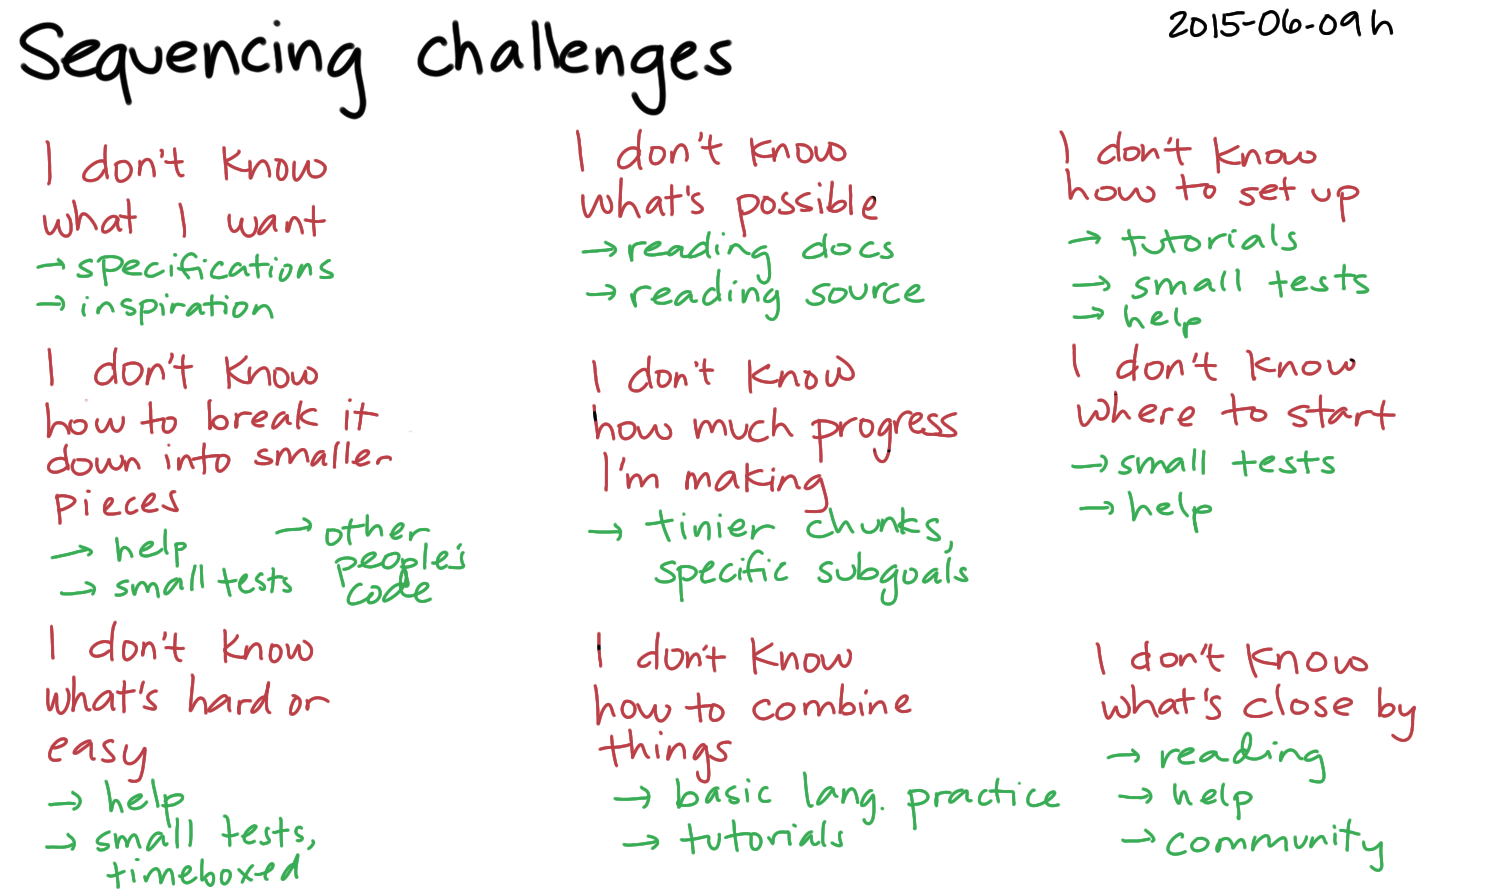 2015-06-09h Sequencing challenges -- index card #learning #problem-solving #sequencing #challenges.png